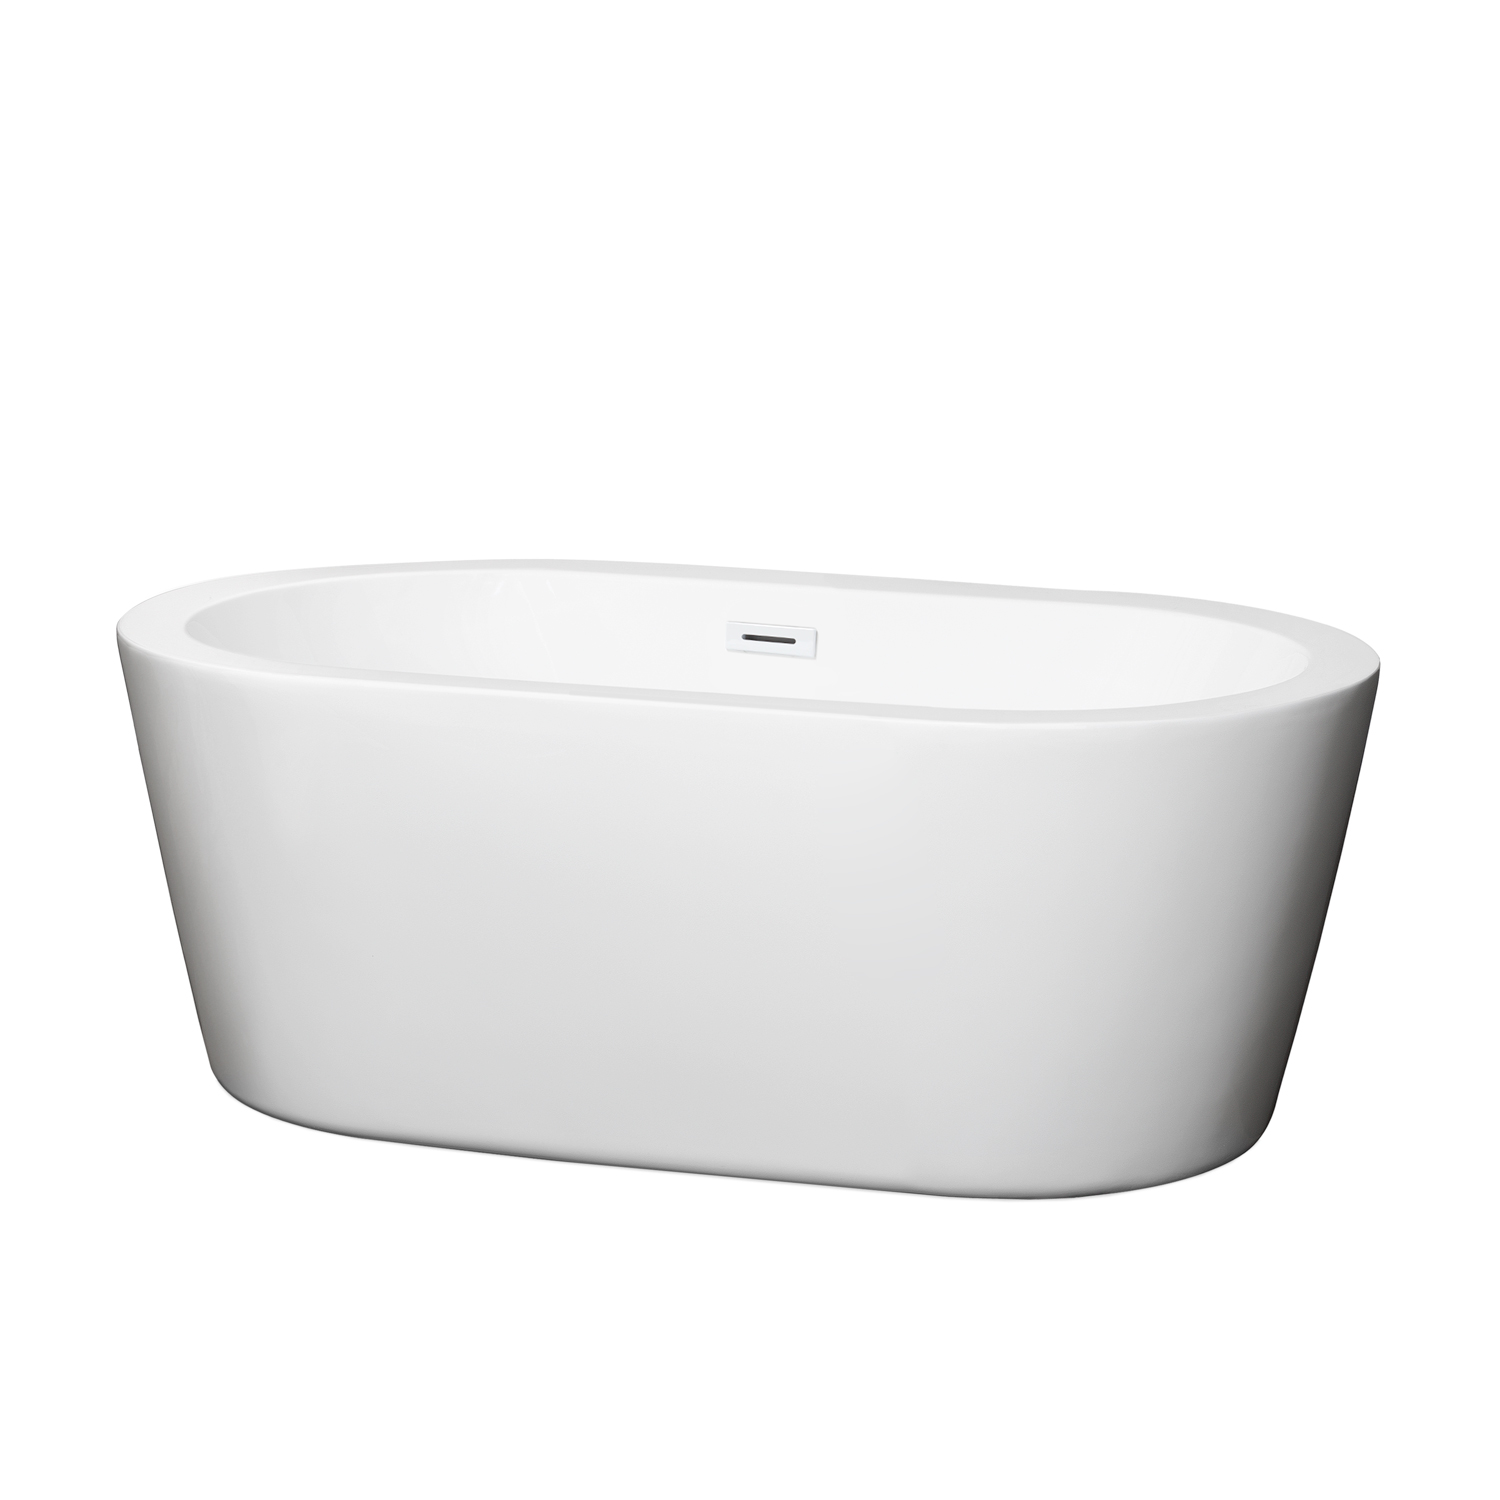 60" Freestanding Bathtub in White with Shiny White Pop-up Drain and Overflow Trim